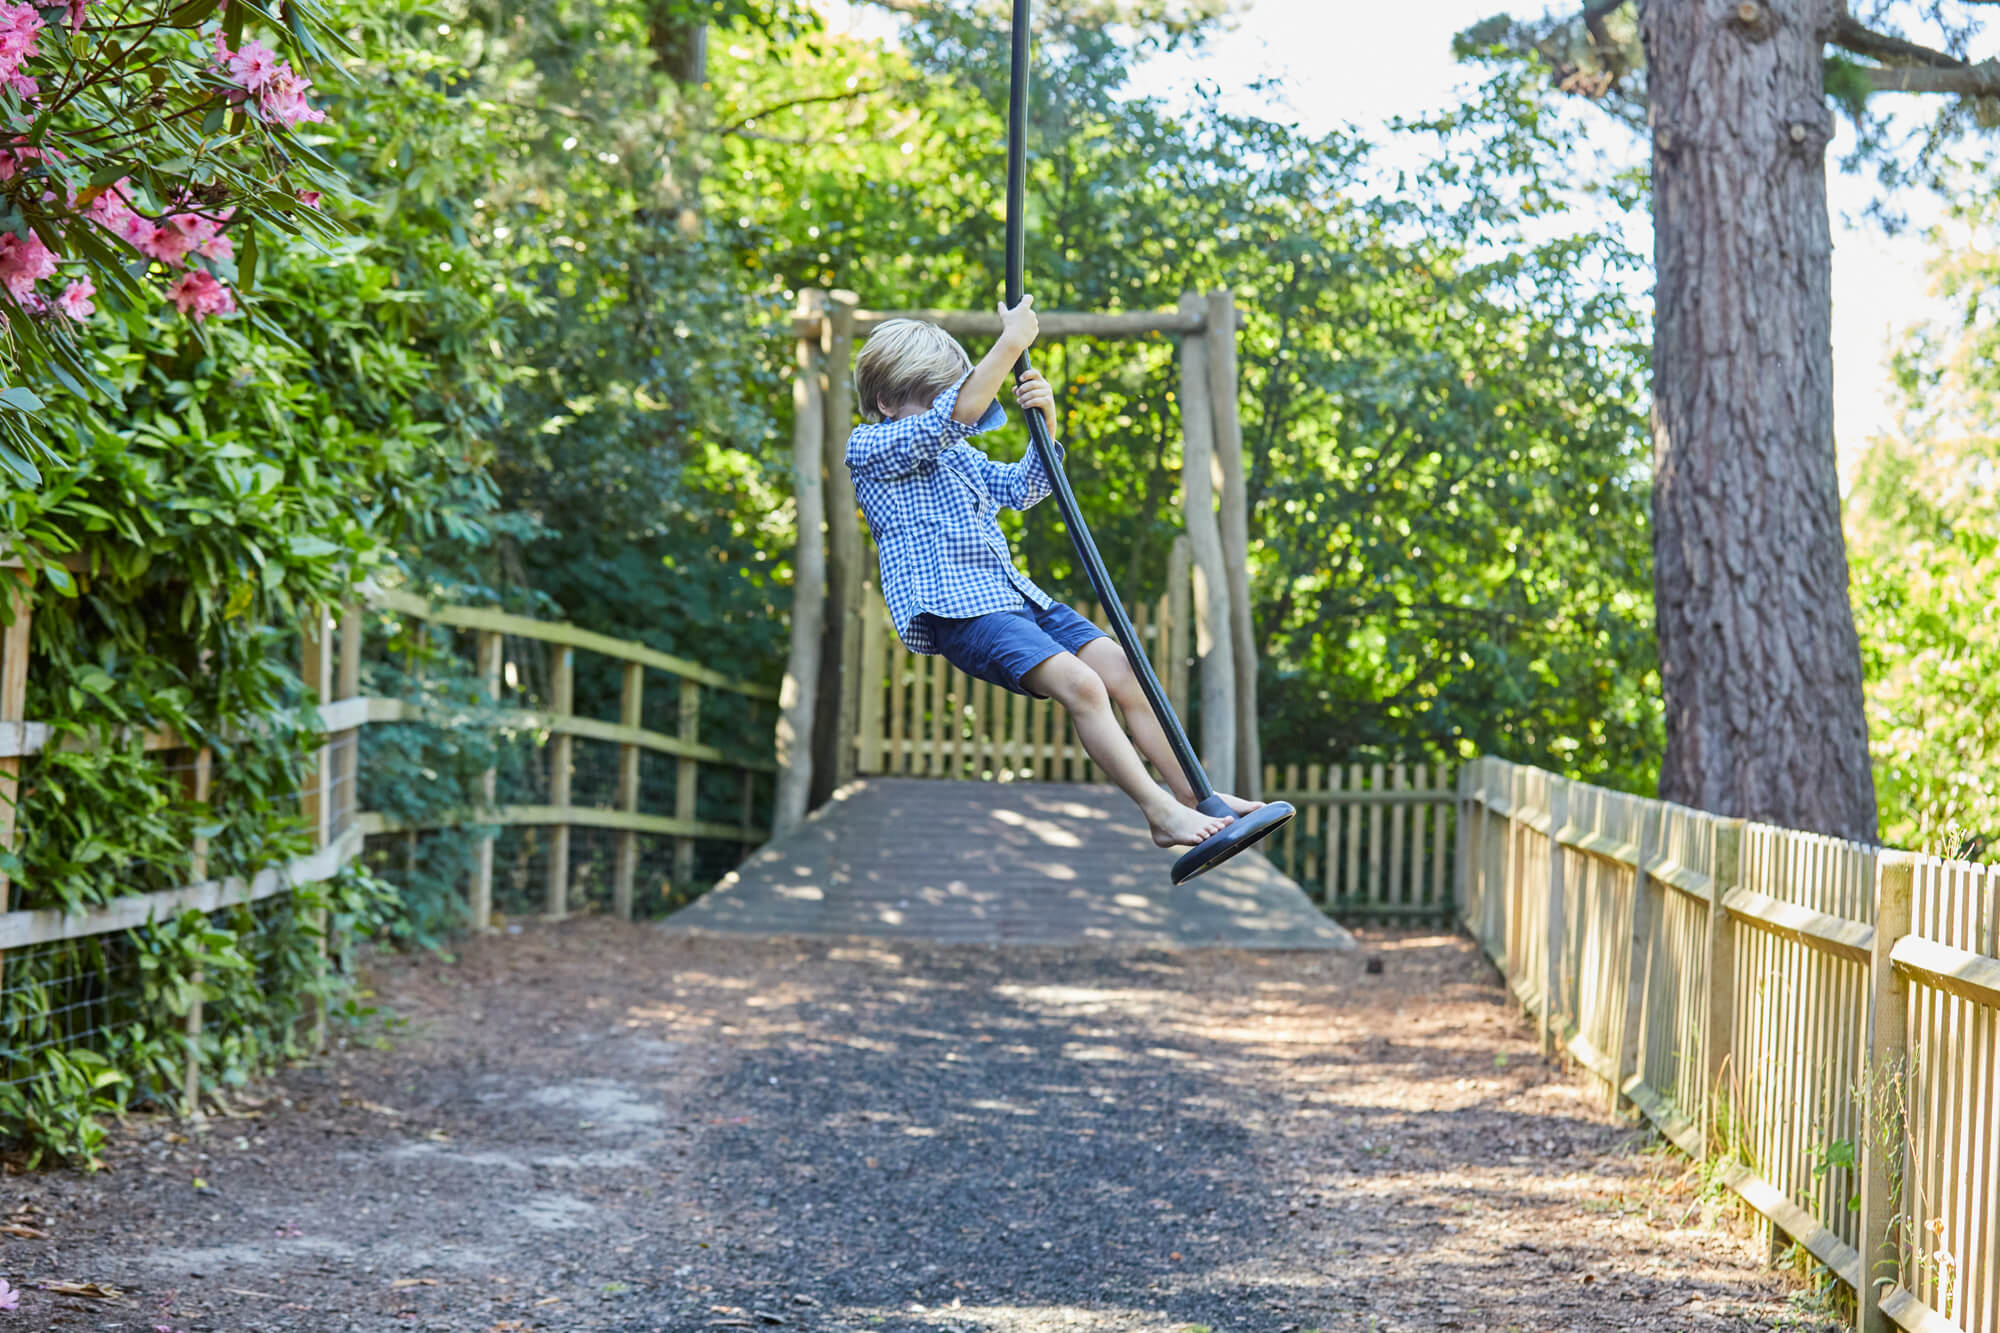 A child on the zip wire in the Advenure Playground at Borde Hill.